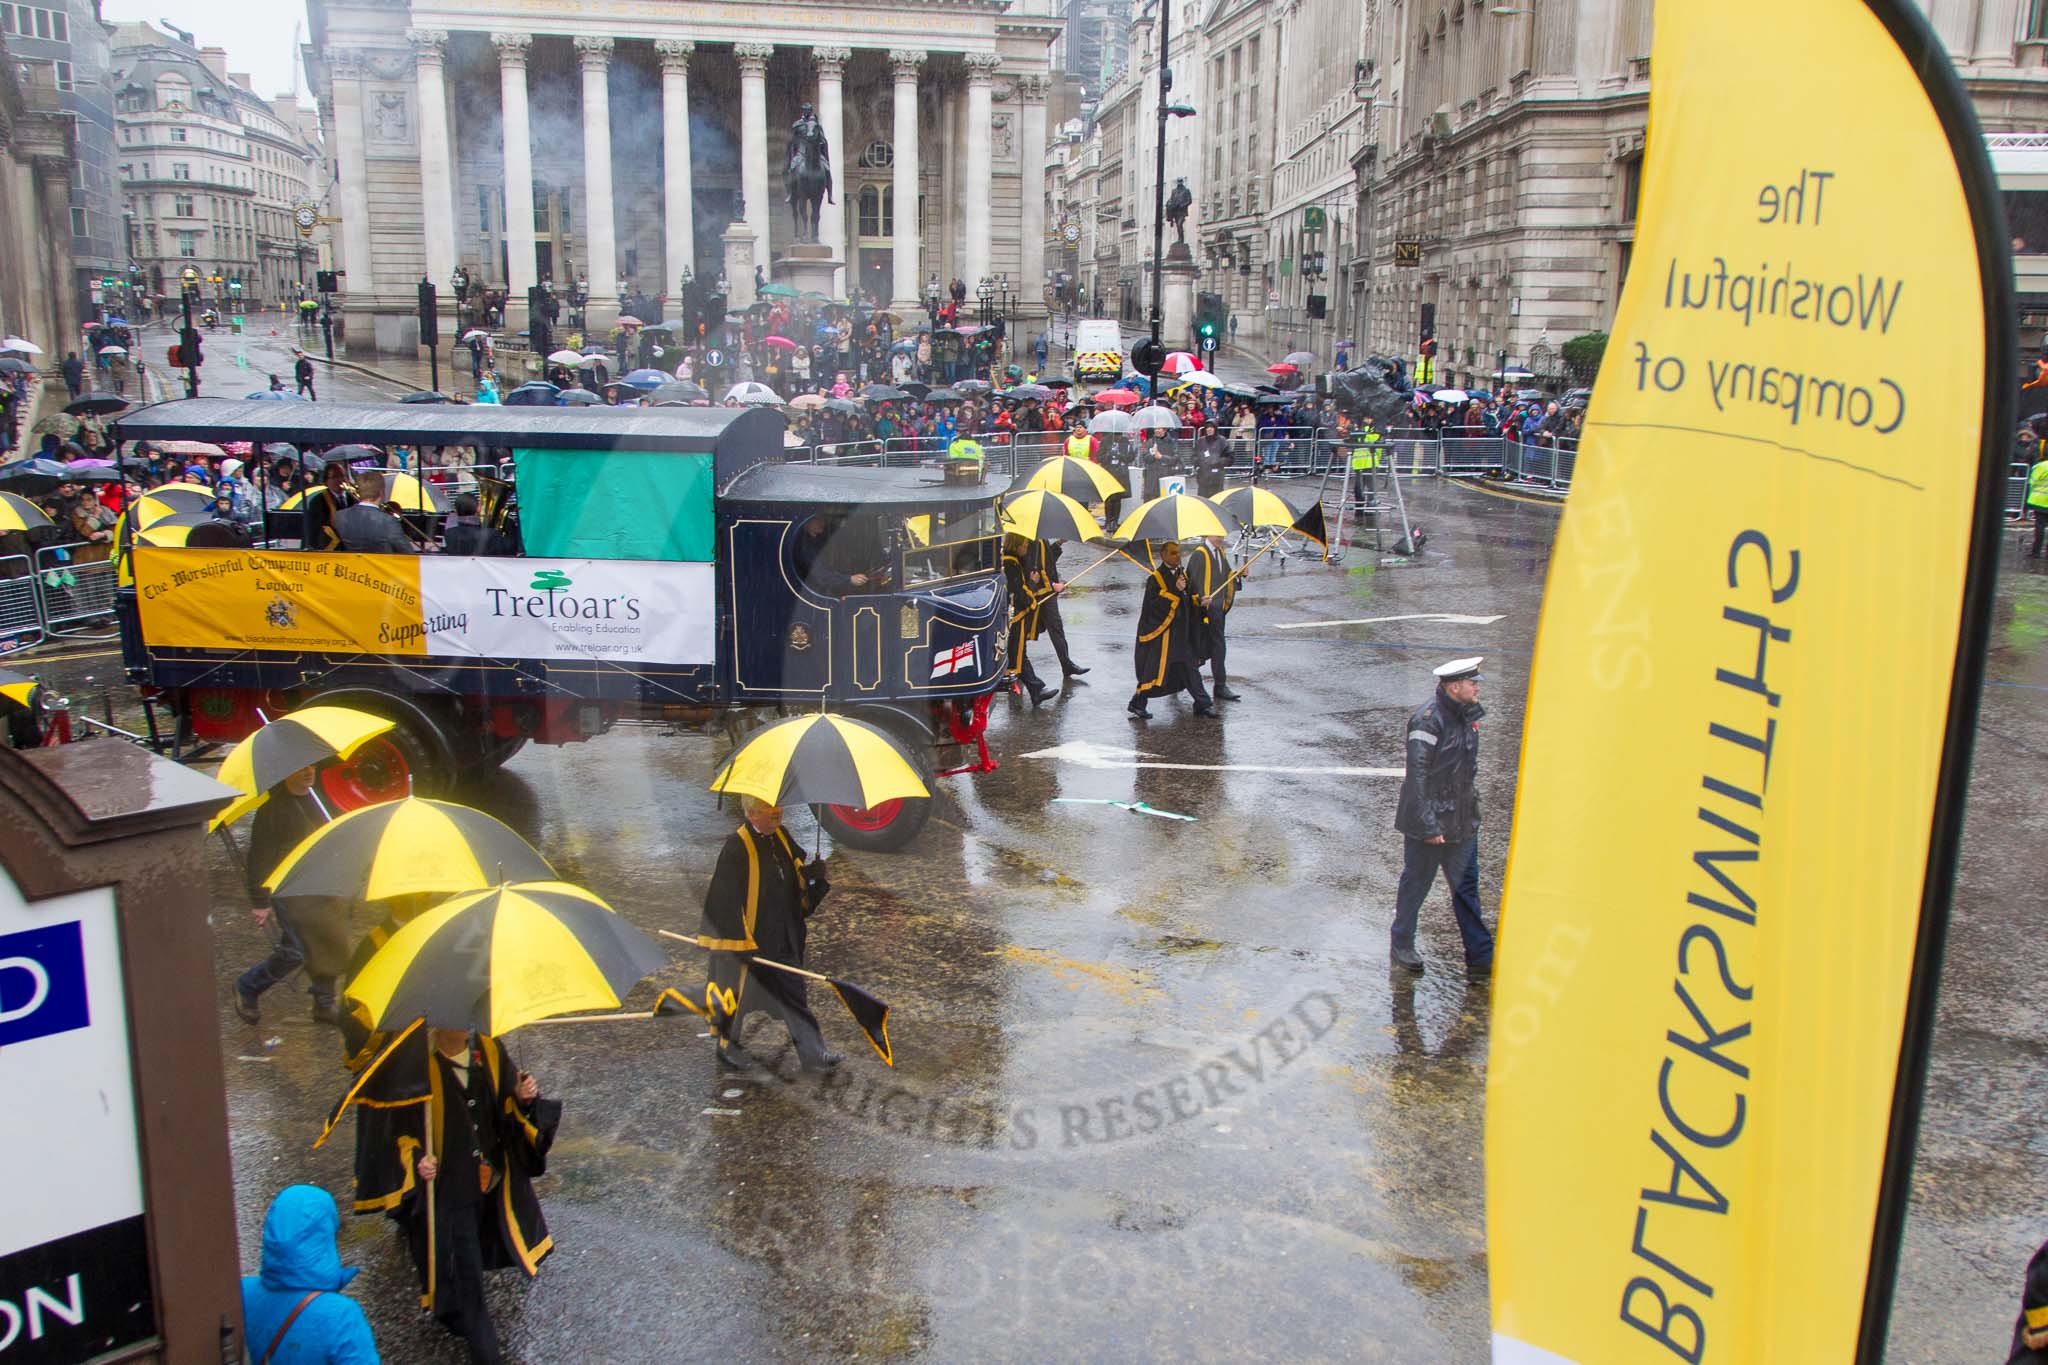 Lord Mayor's Show 2013: 33-Worshipful Company of Blacksmiths-since 1299 Company has supported and promoted the craft of blacksmithings..
Press stand opposite Mansion House, City of London,
London,
Greater London,
United Kingdom,
on 09 November 2013 at 11:17, image #432